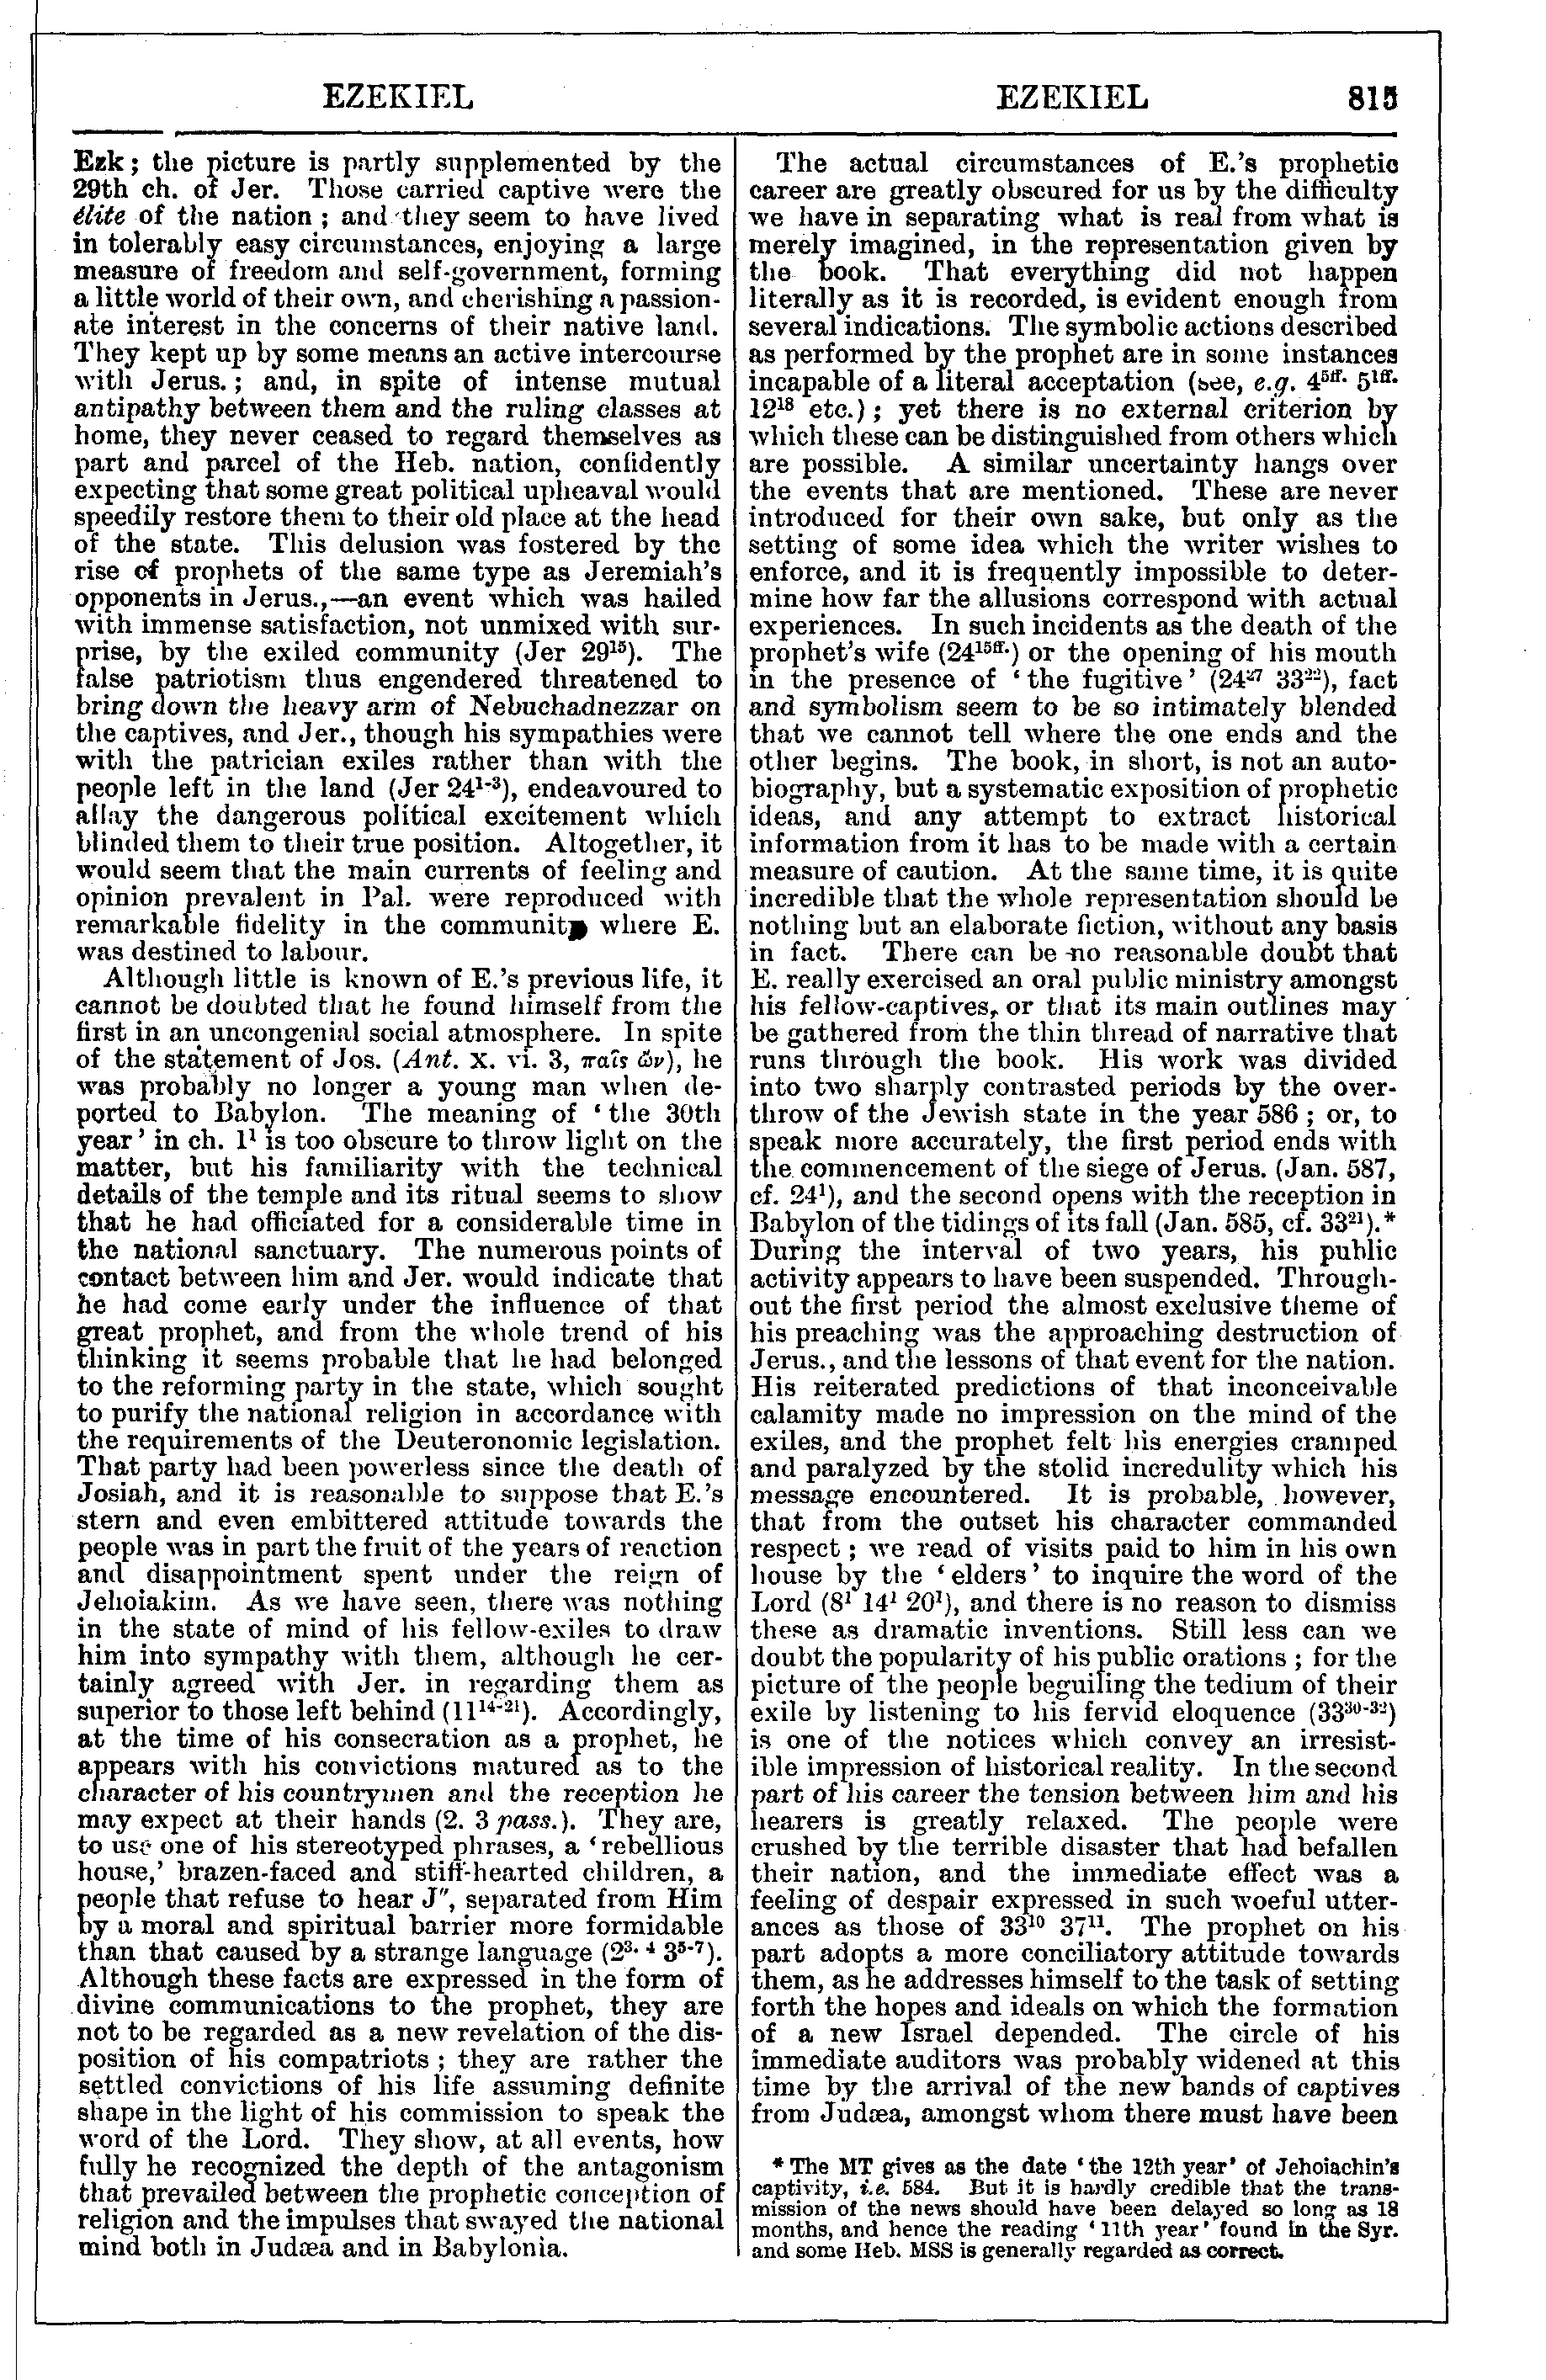 Image of page 815